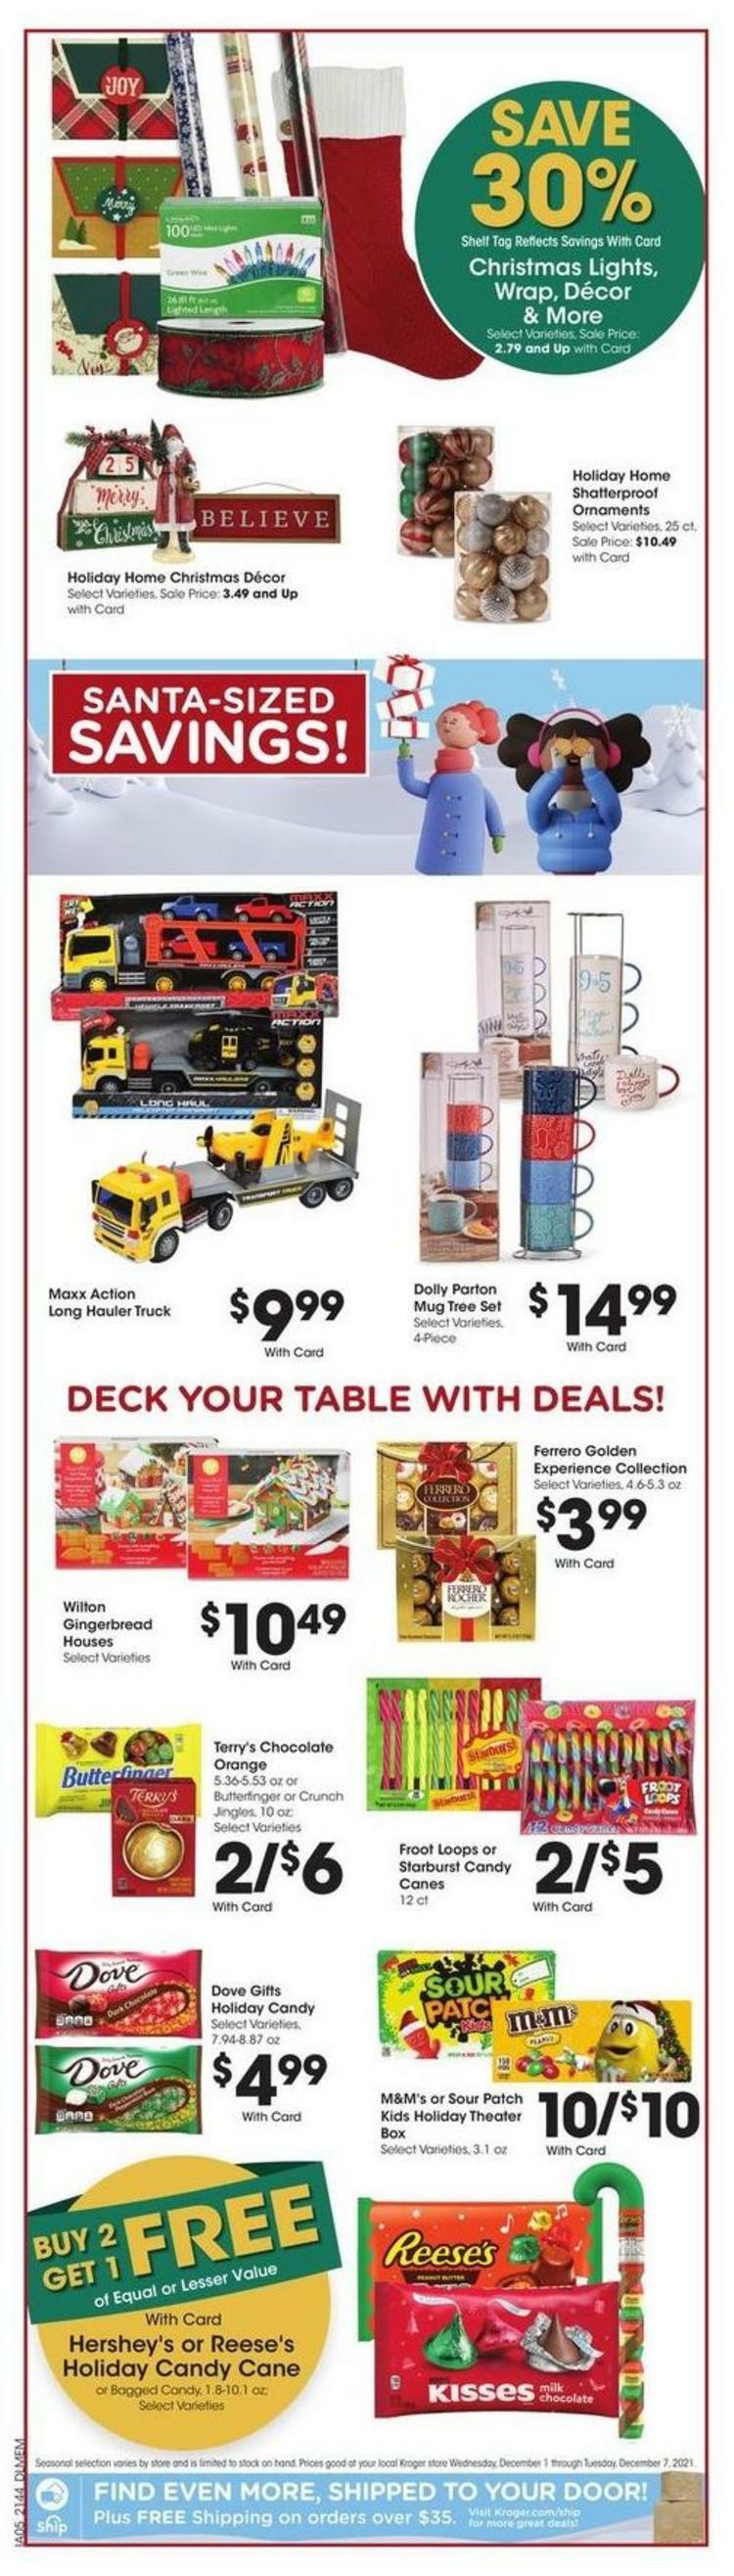 Kroger Weekly Ad from December 1